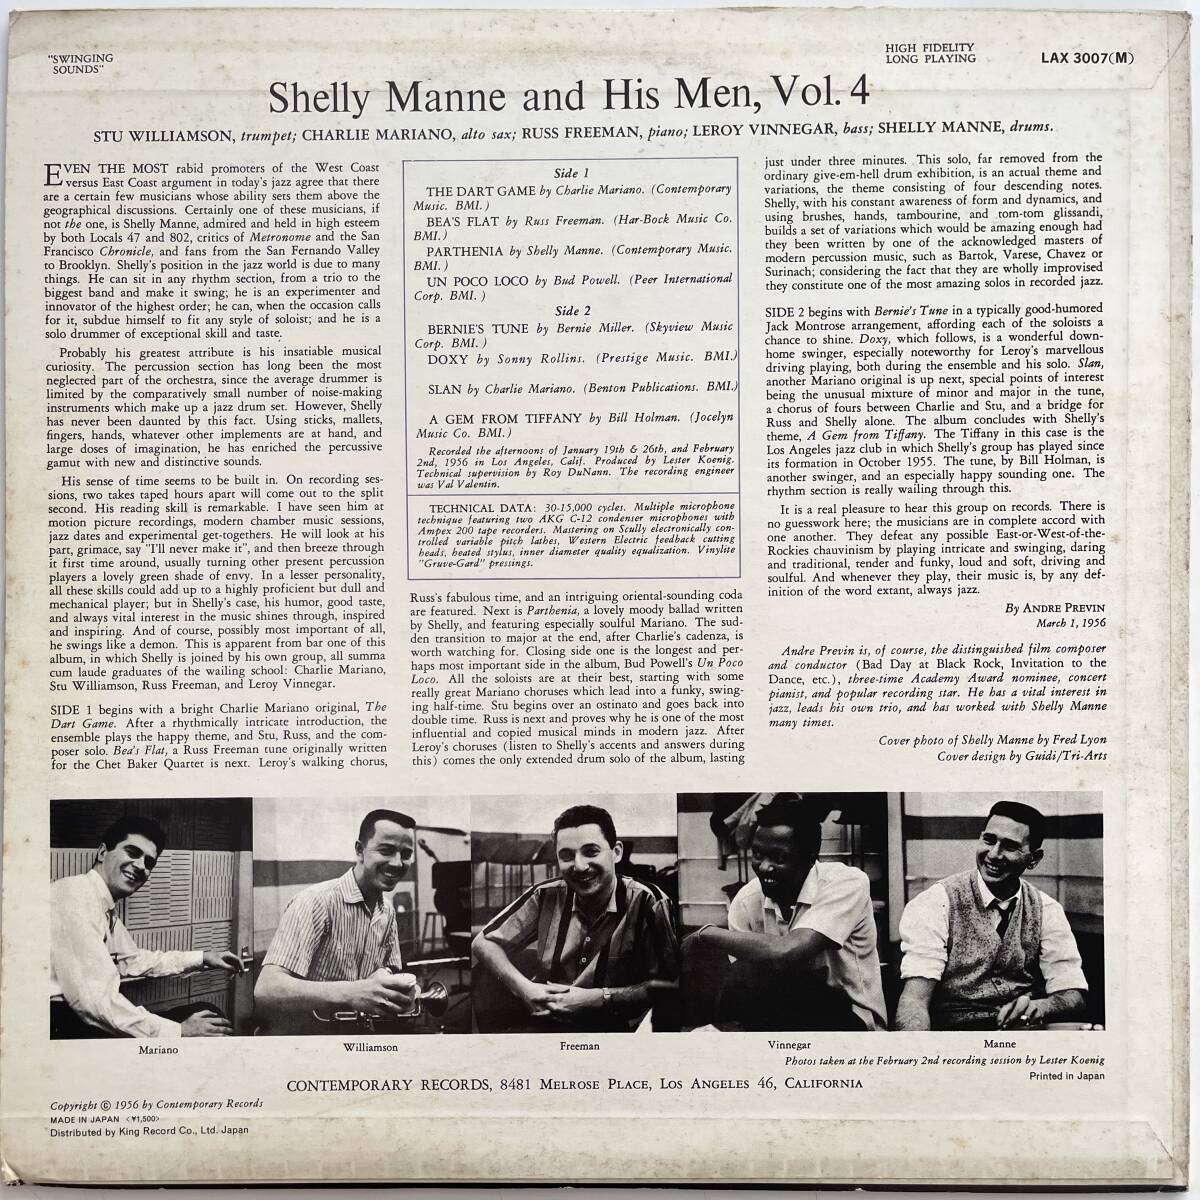 SHELLY MANNE & HIS MEN / CONTEMPORARY SWINGING SOUNDS 日本盤　19??年　帯なし、ライナーノーツあり（切り抜きあり）_画像2